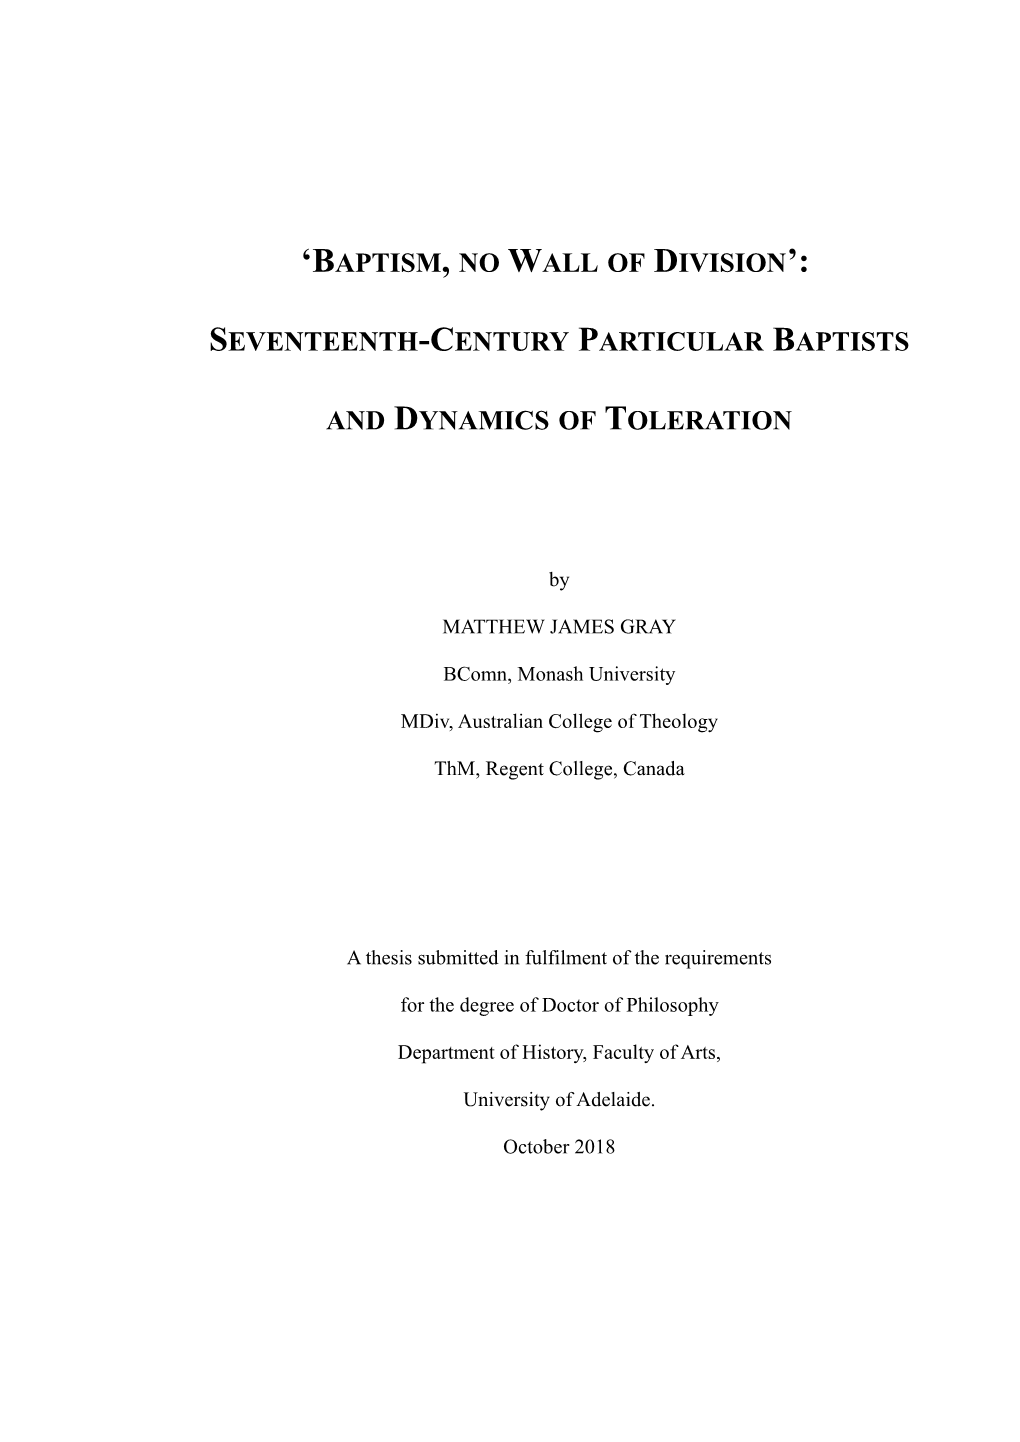 'Baptism, No Wall to Division': Seventeenth-Century Particular Baptists and Dynamics of Toleration